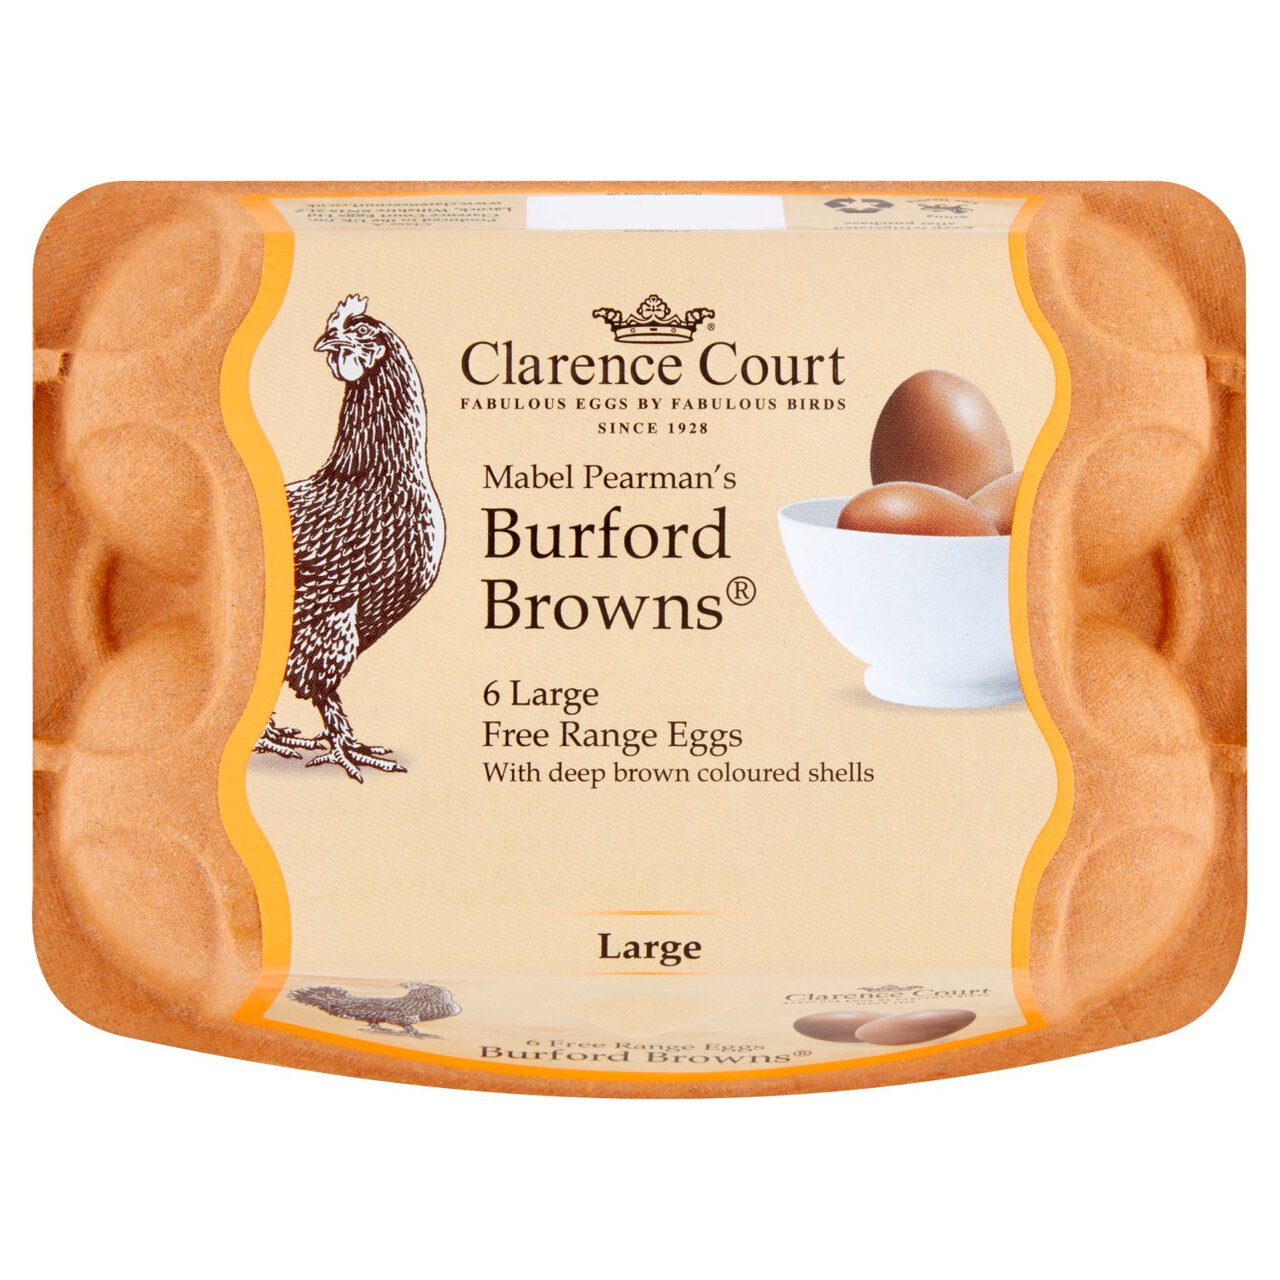 Clarence Court Burford Brown Large Free Range Eggs 6 per pack